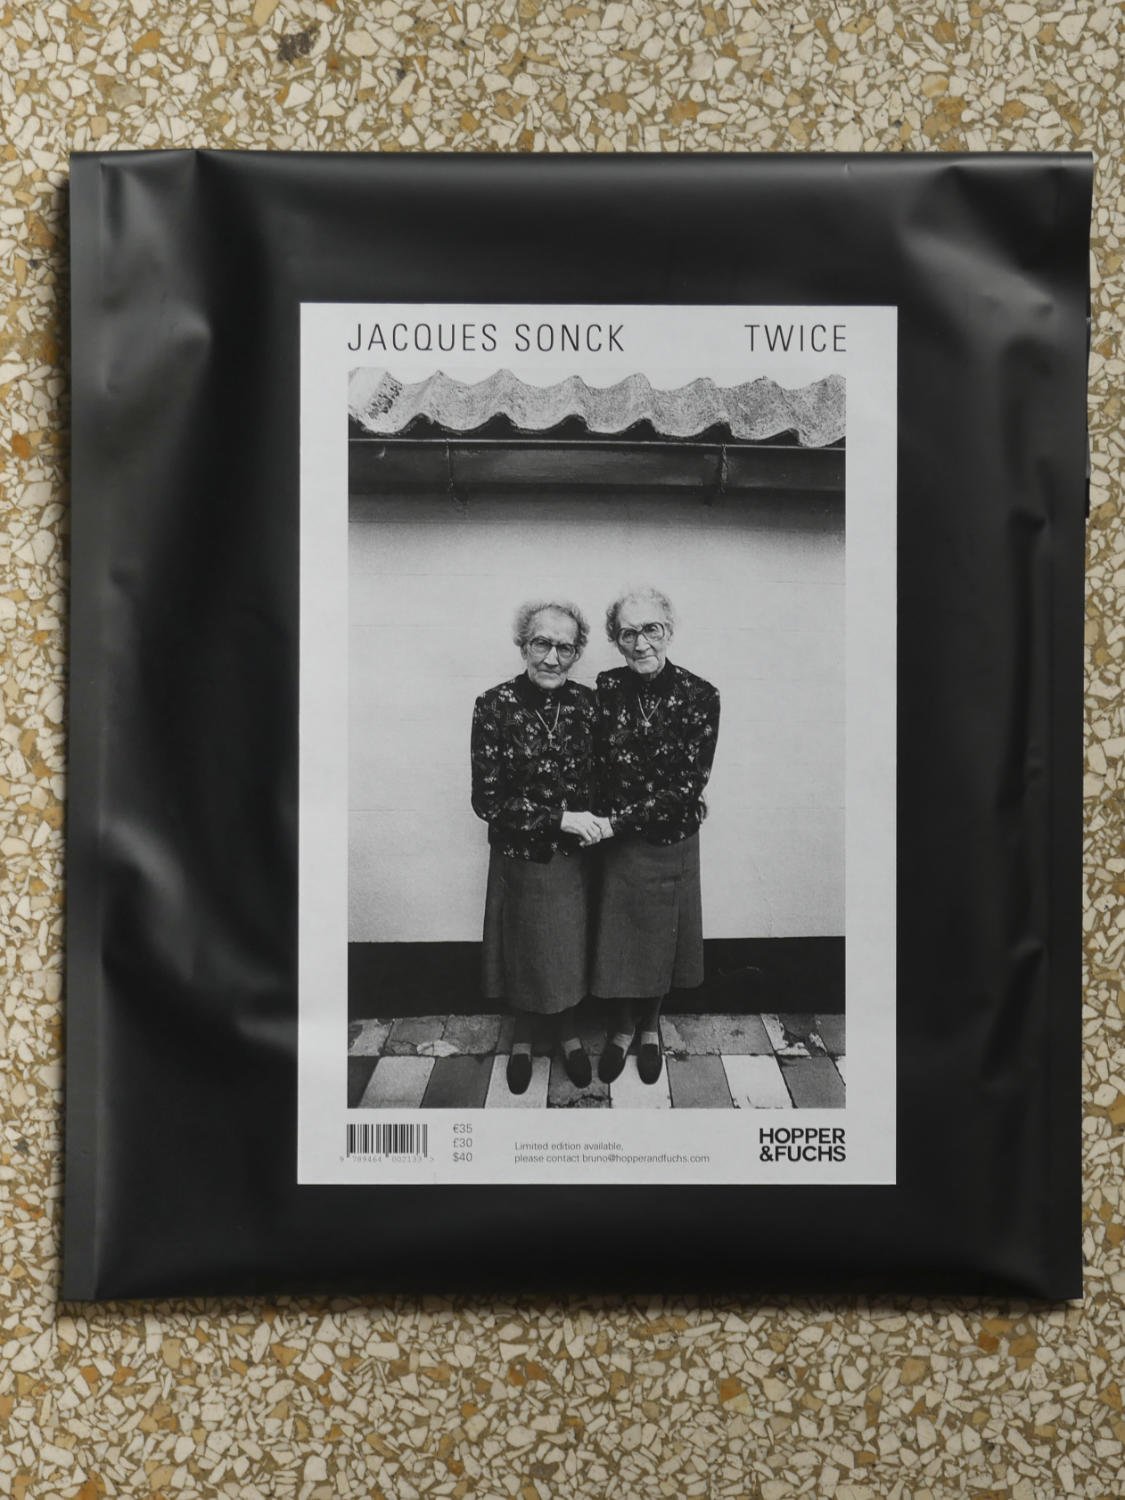 Twice by Jacques Sonck - Tipi bookshop